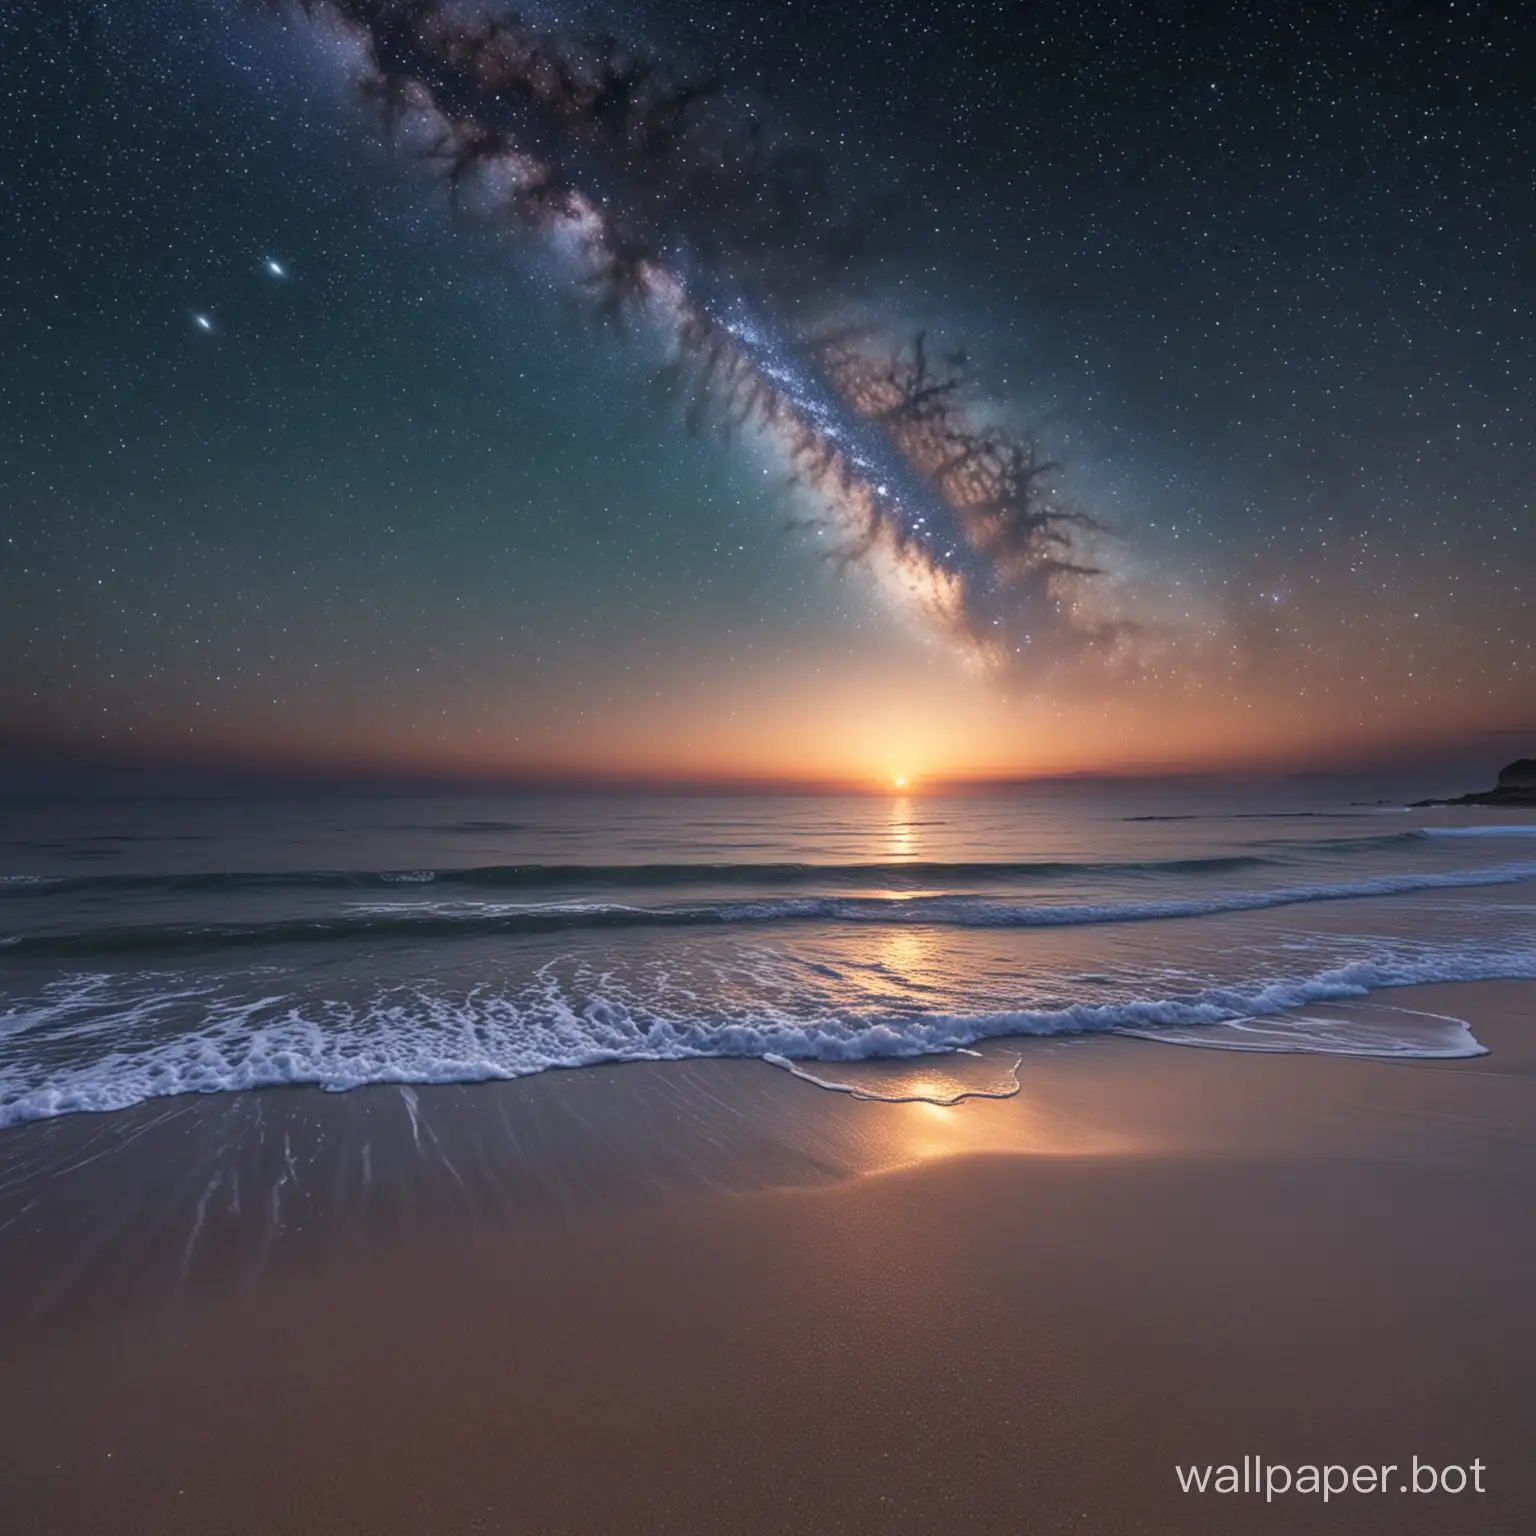 Quiet beach at dawn with 1 galaxy and many visible star in the sky